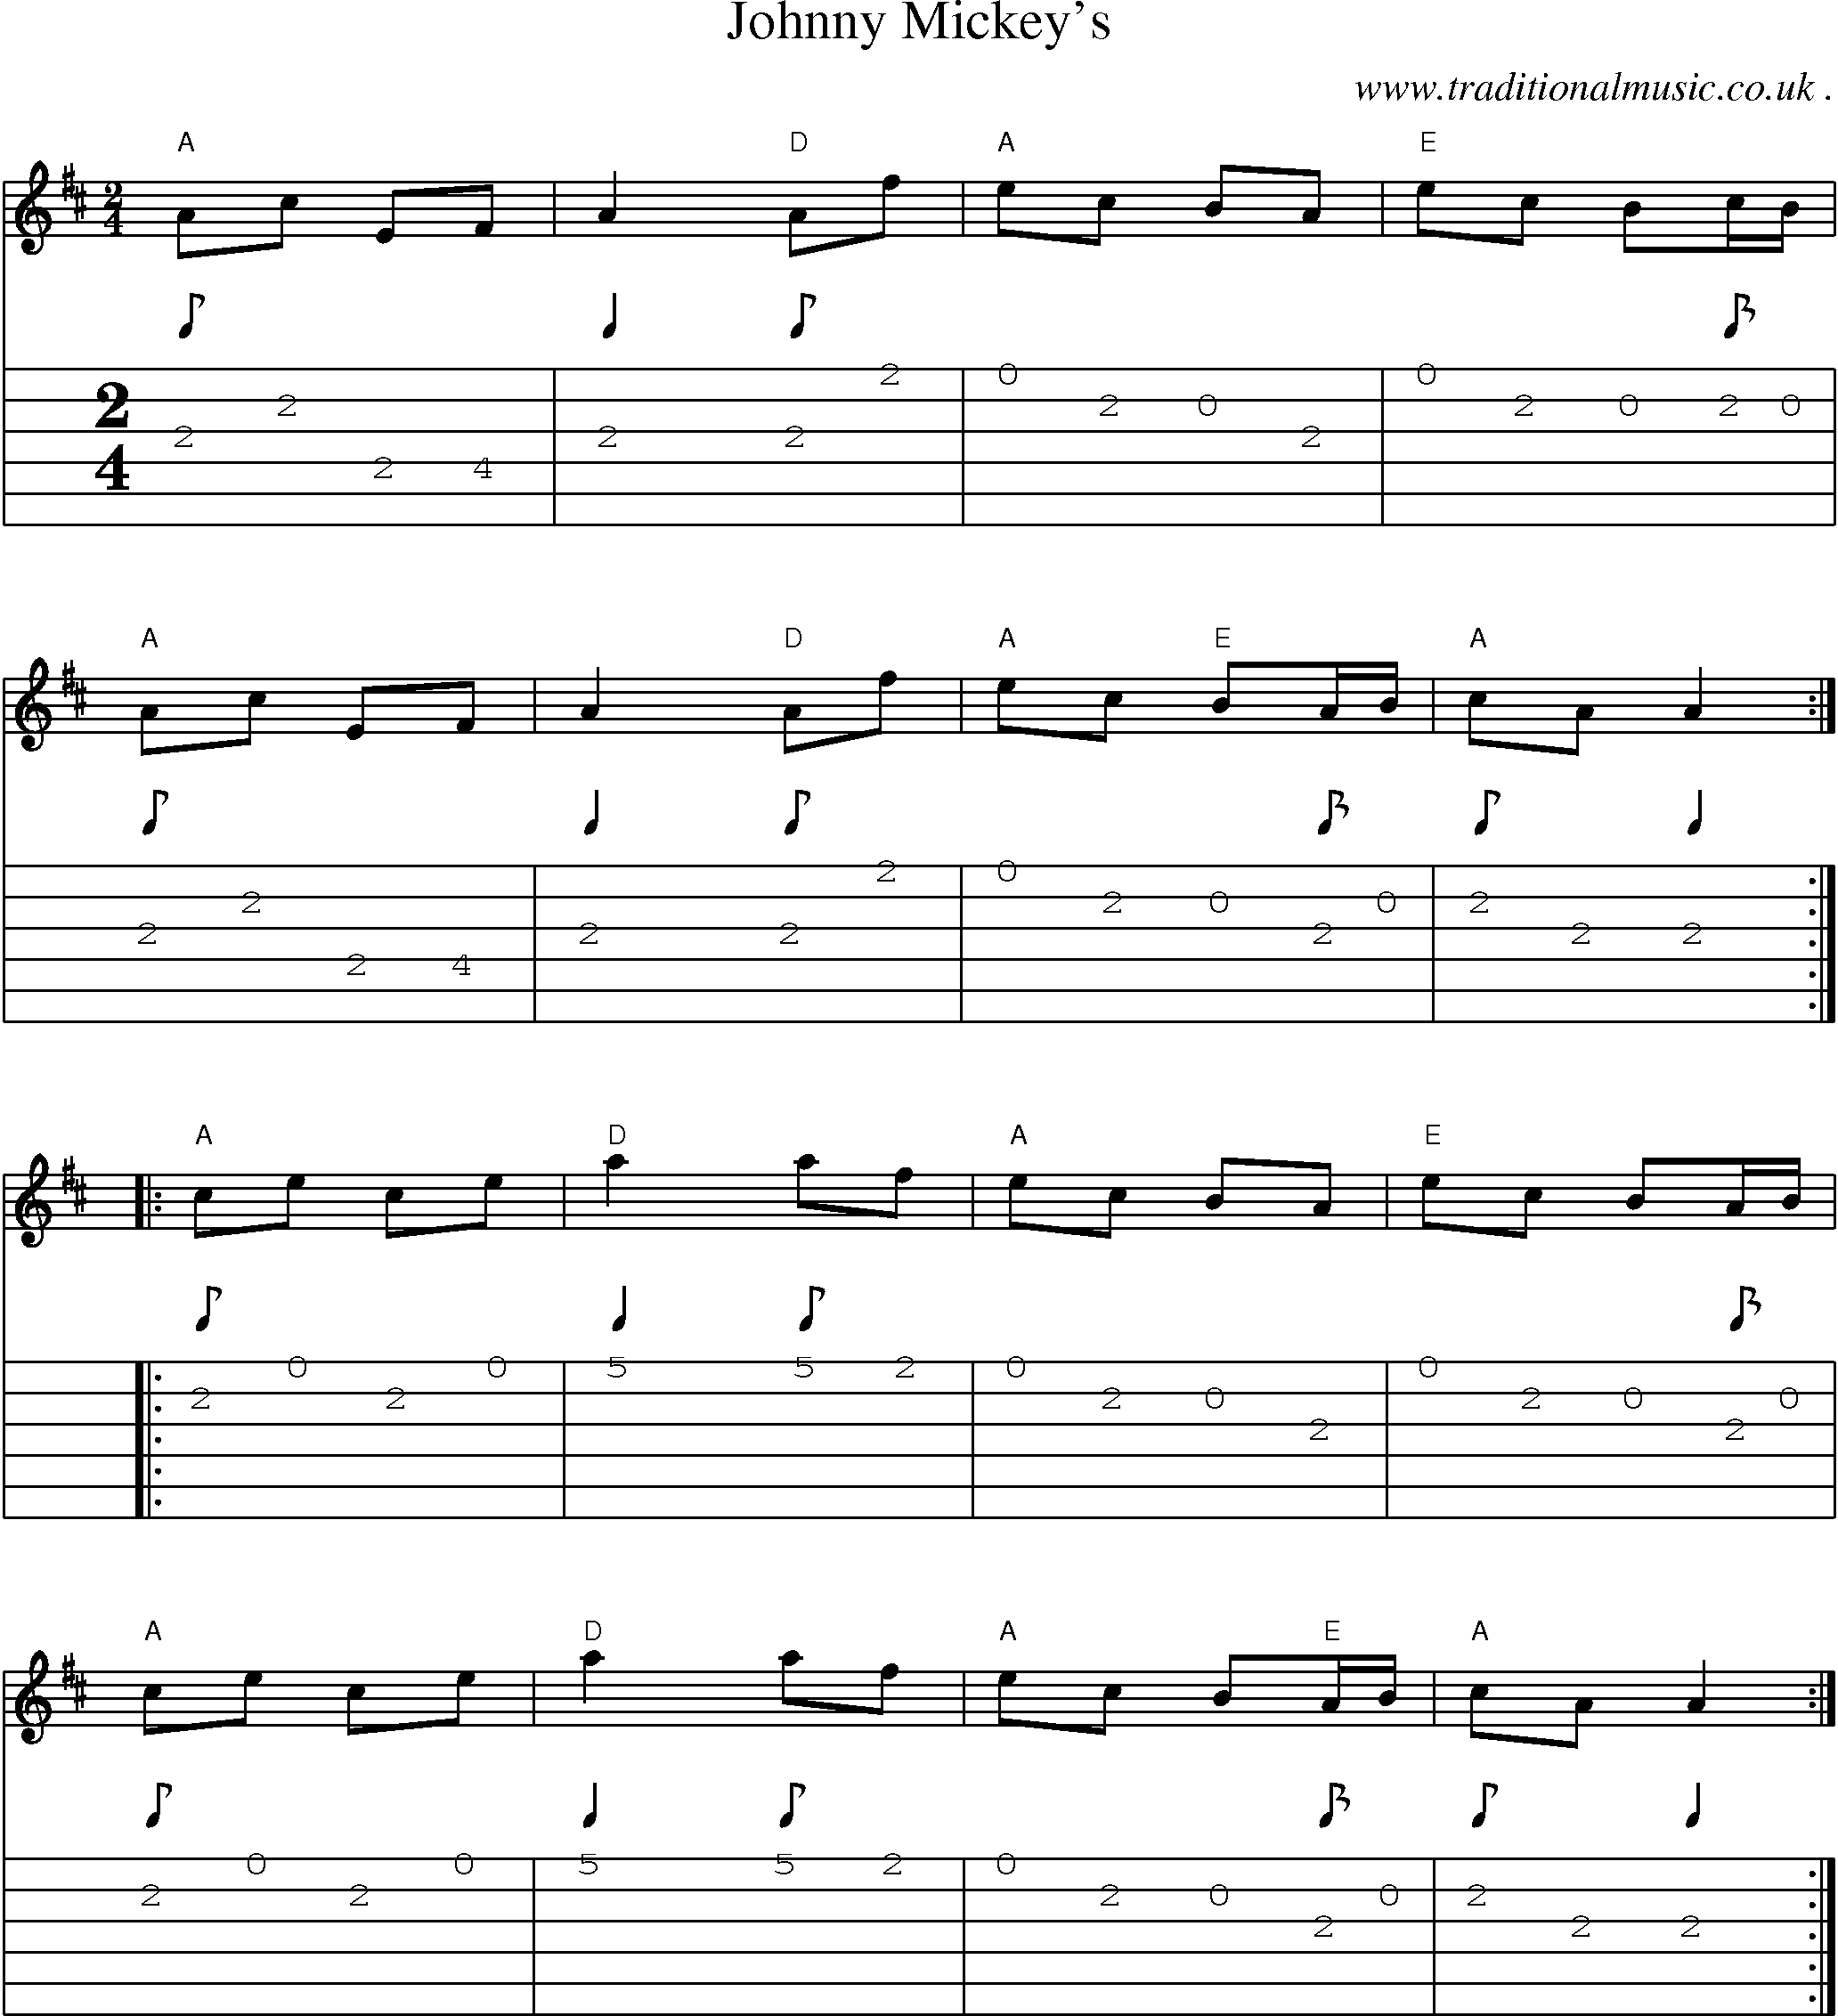 Music Score and Guitar Tabs for Johnny Mickeys